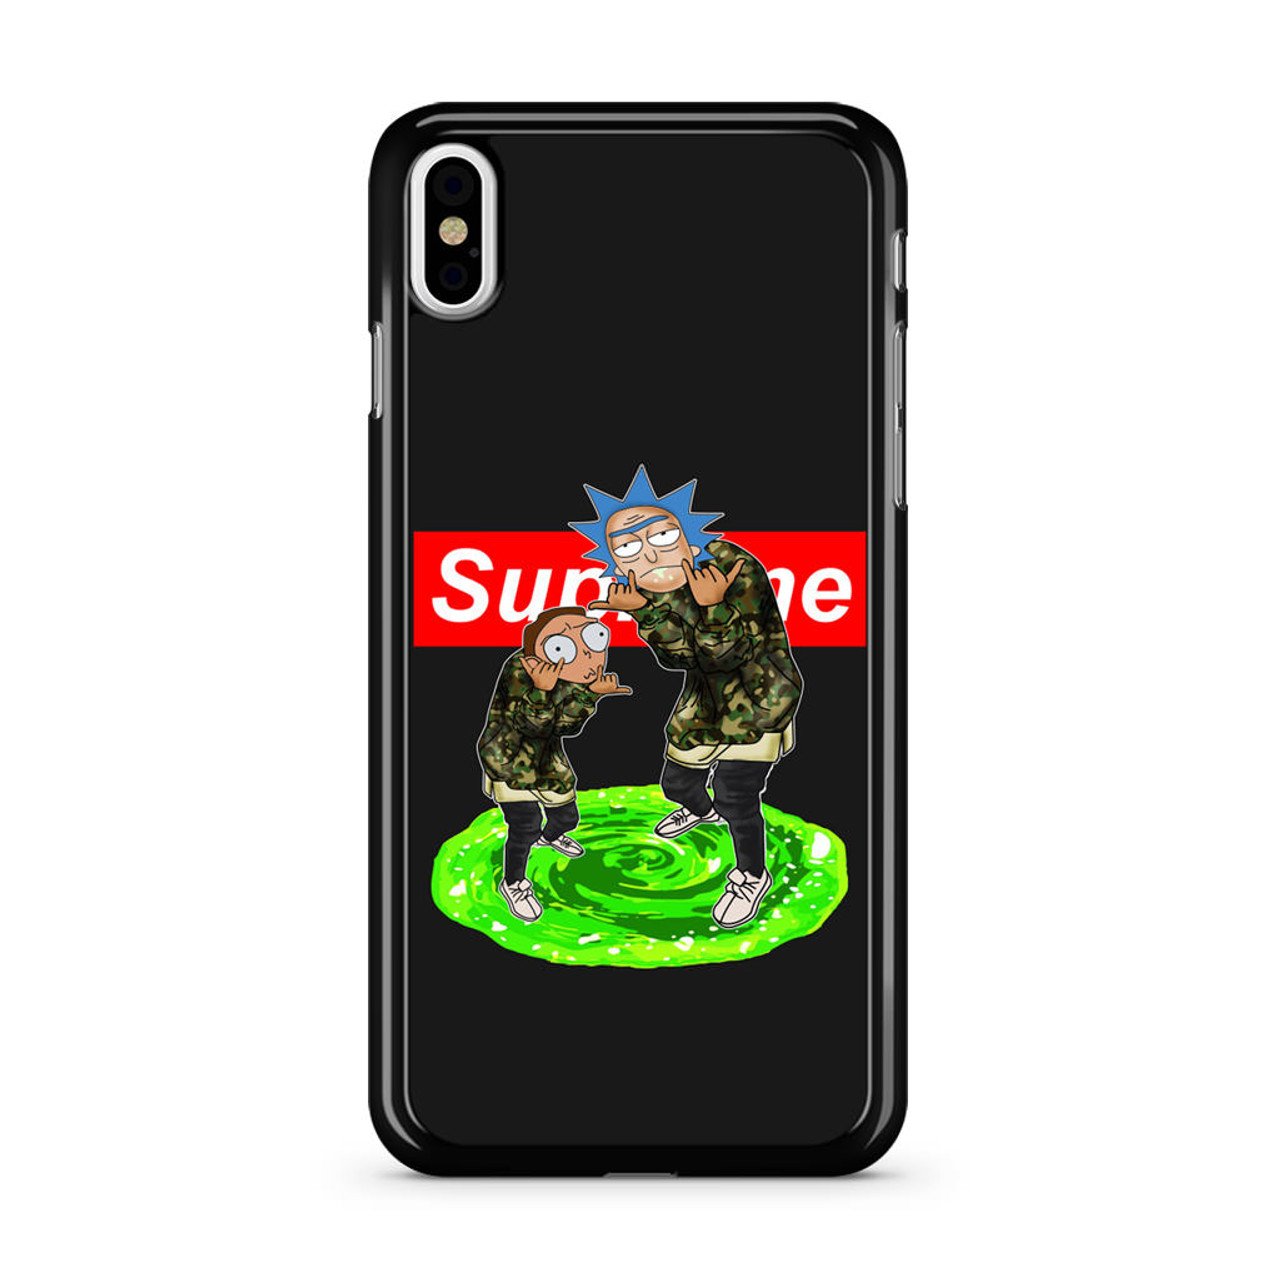 Rick and Morty Hypebeast iPhone X Case - CASESHUNTER